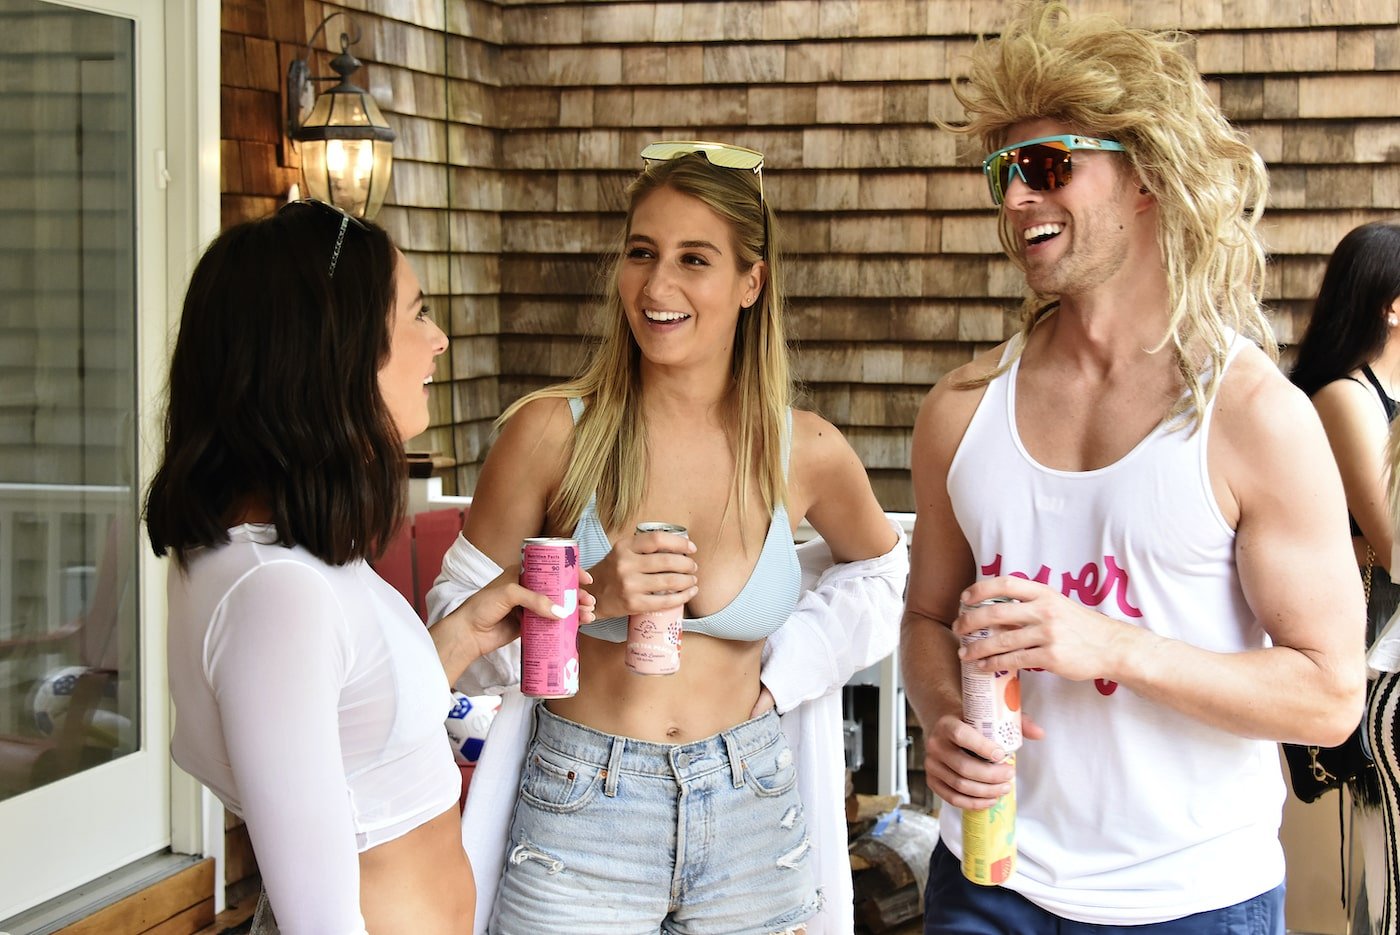 Paige DeSorbo, Amanda Batula, Kyle Cooke from 'Summer House' talk during a party